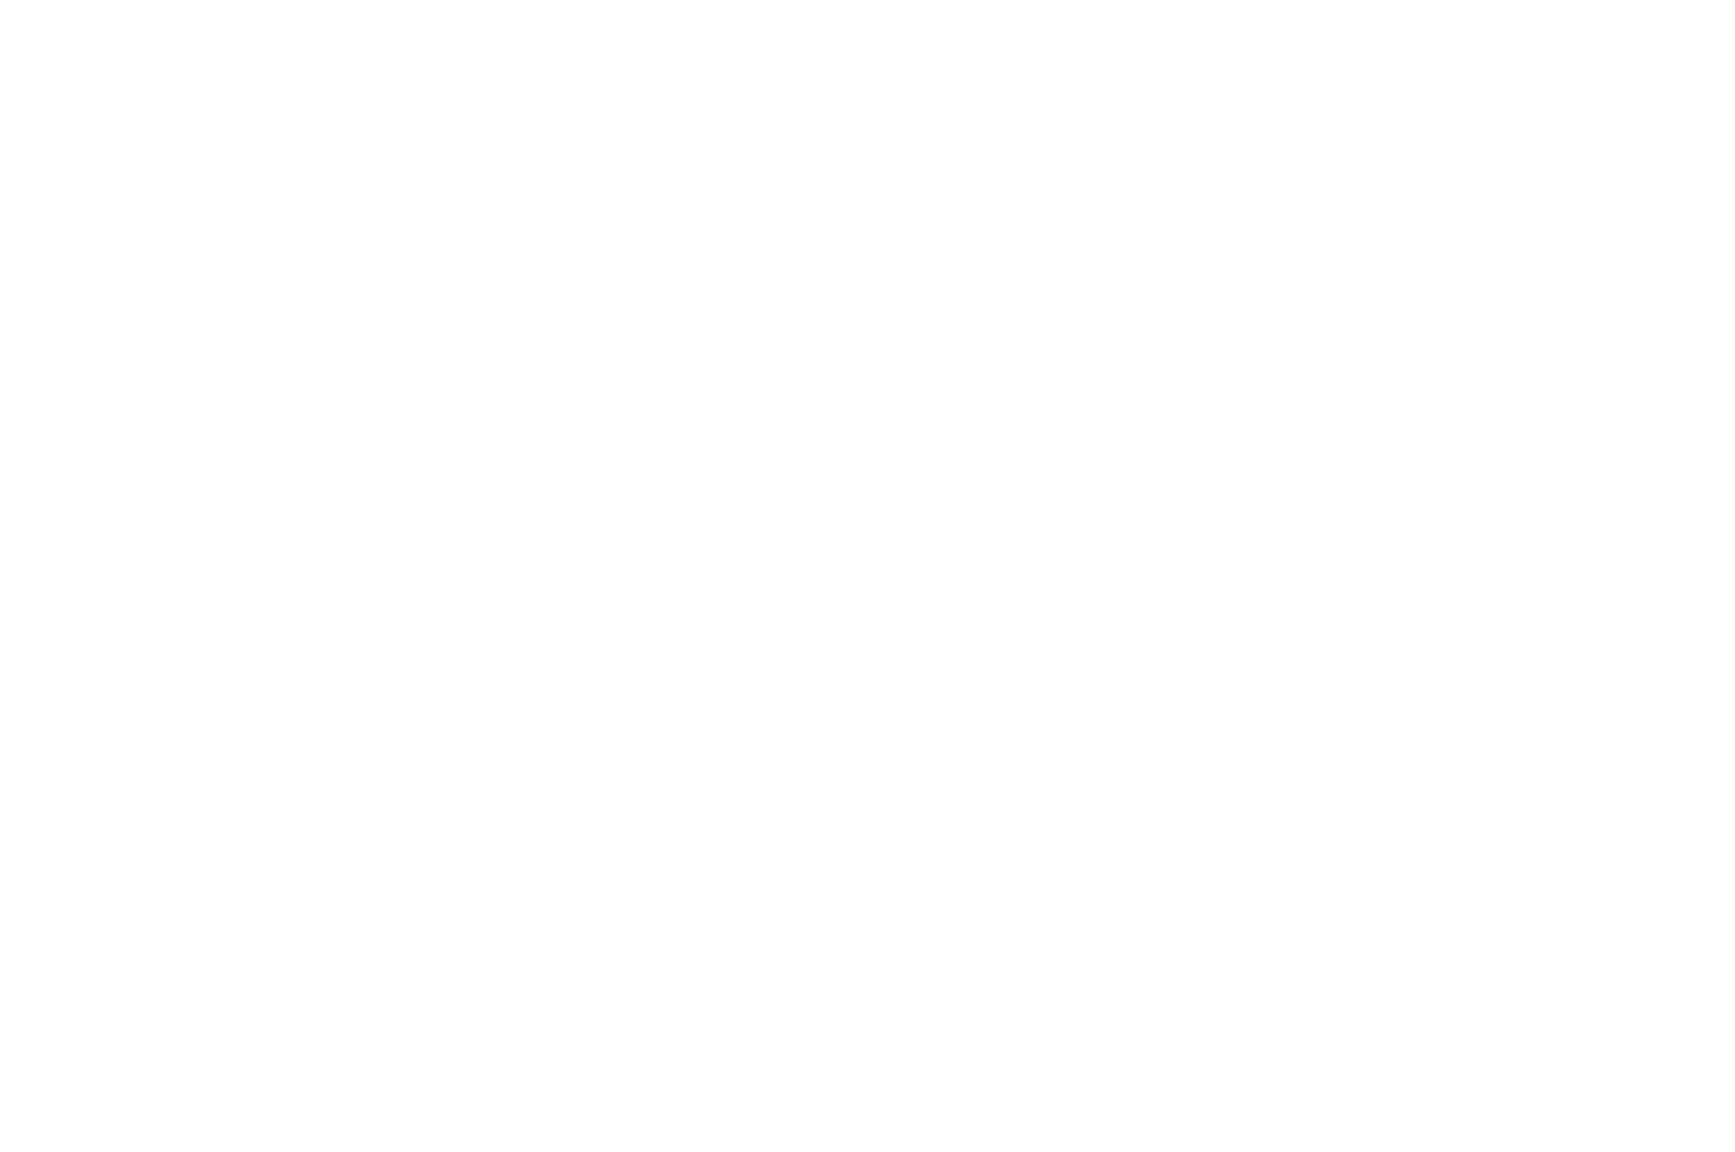 OFFICIAL SELECTION_WHITE - Austin Micro Film Festival - 2020 (2).png